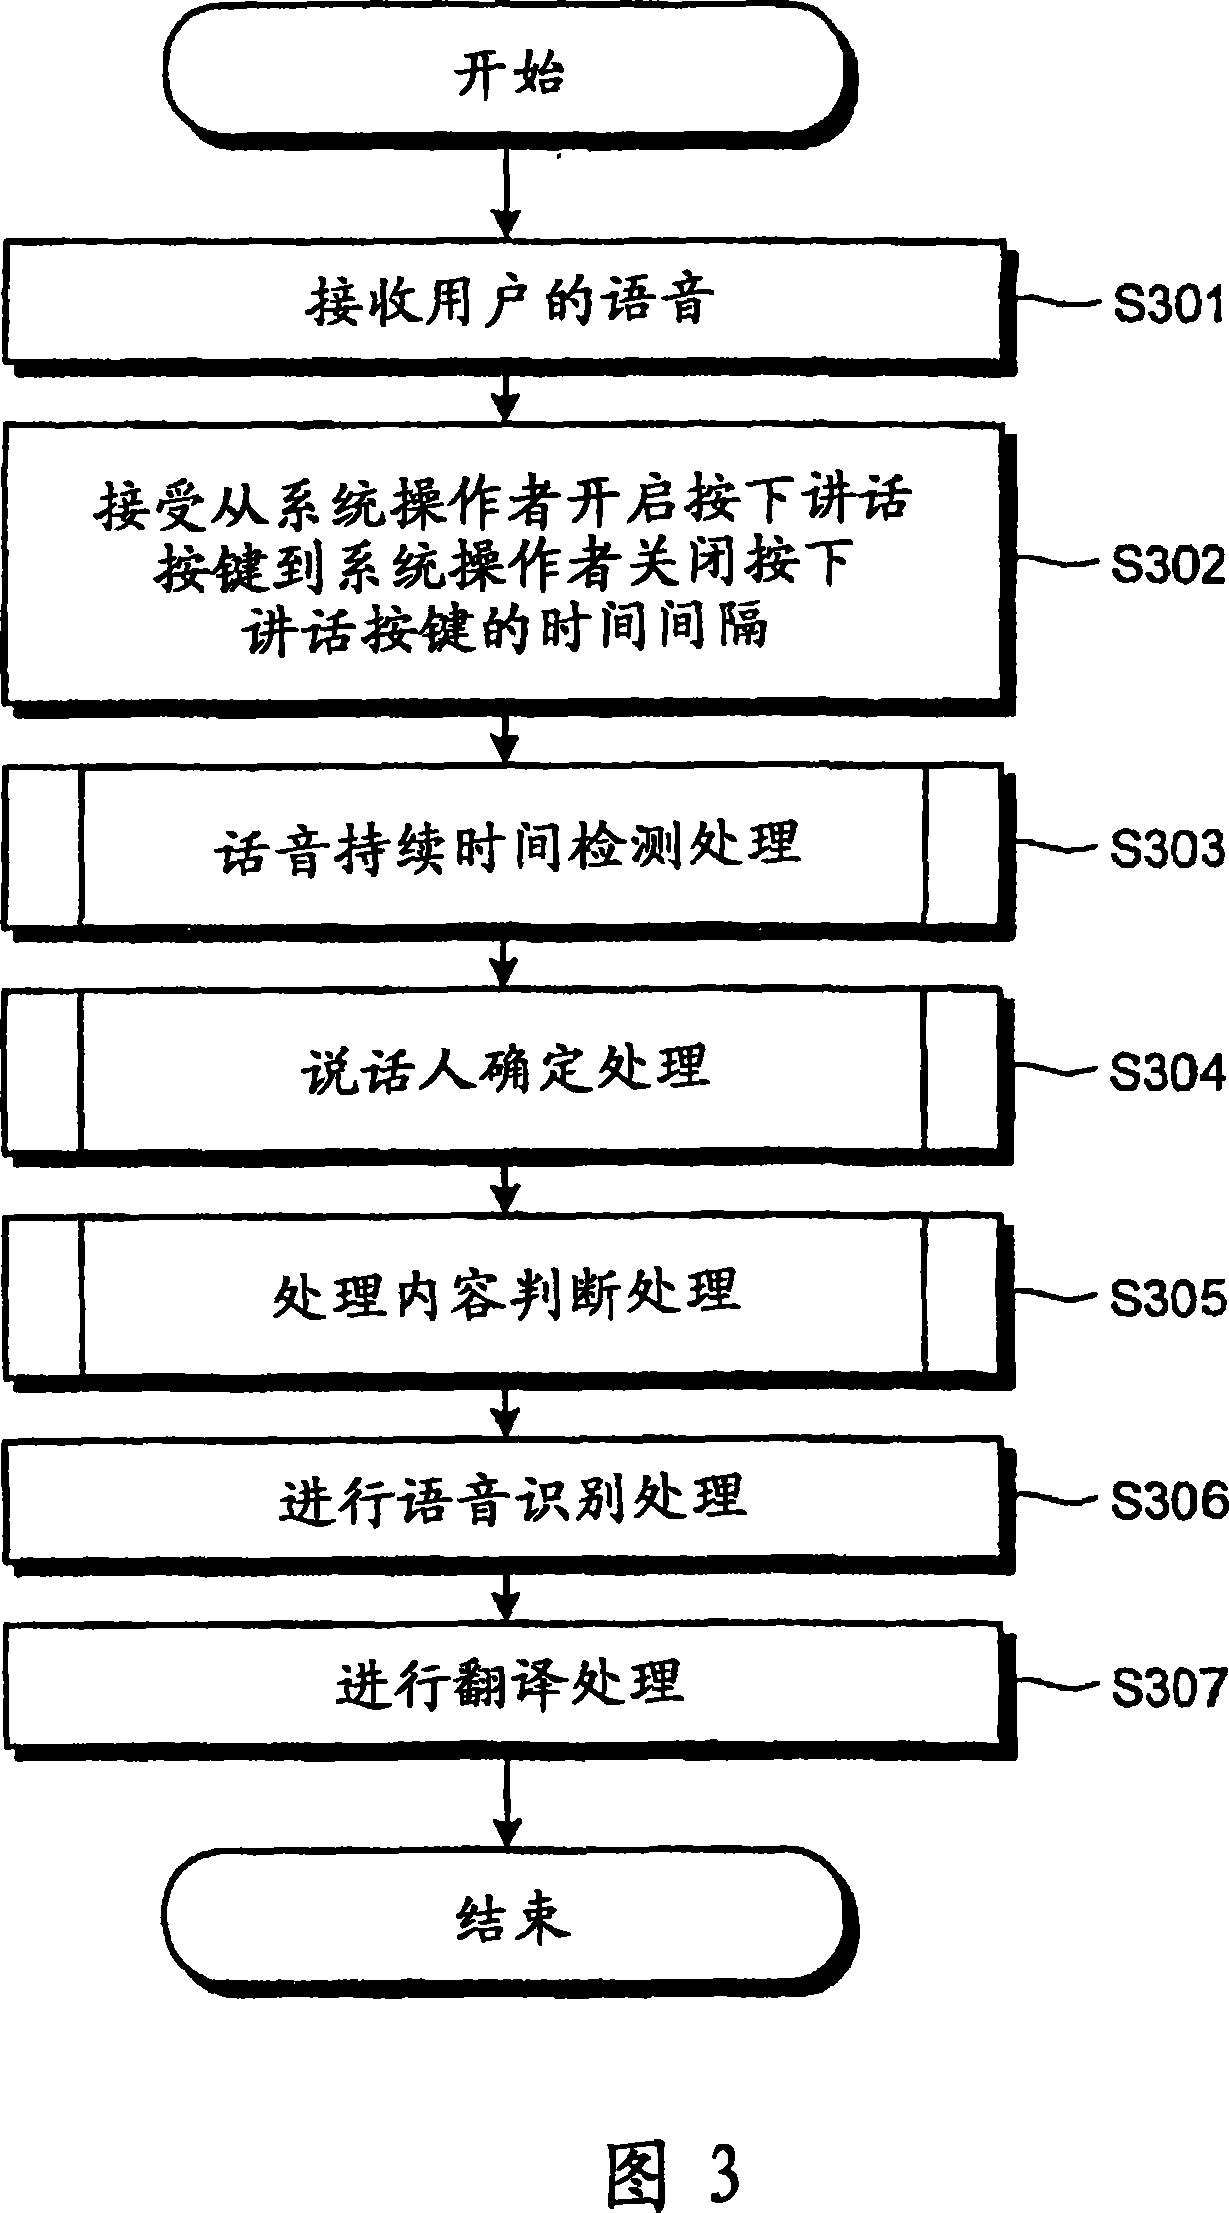 Apparatus and method for speech processing